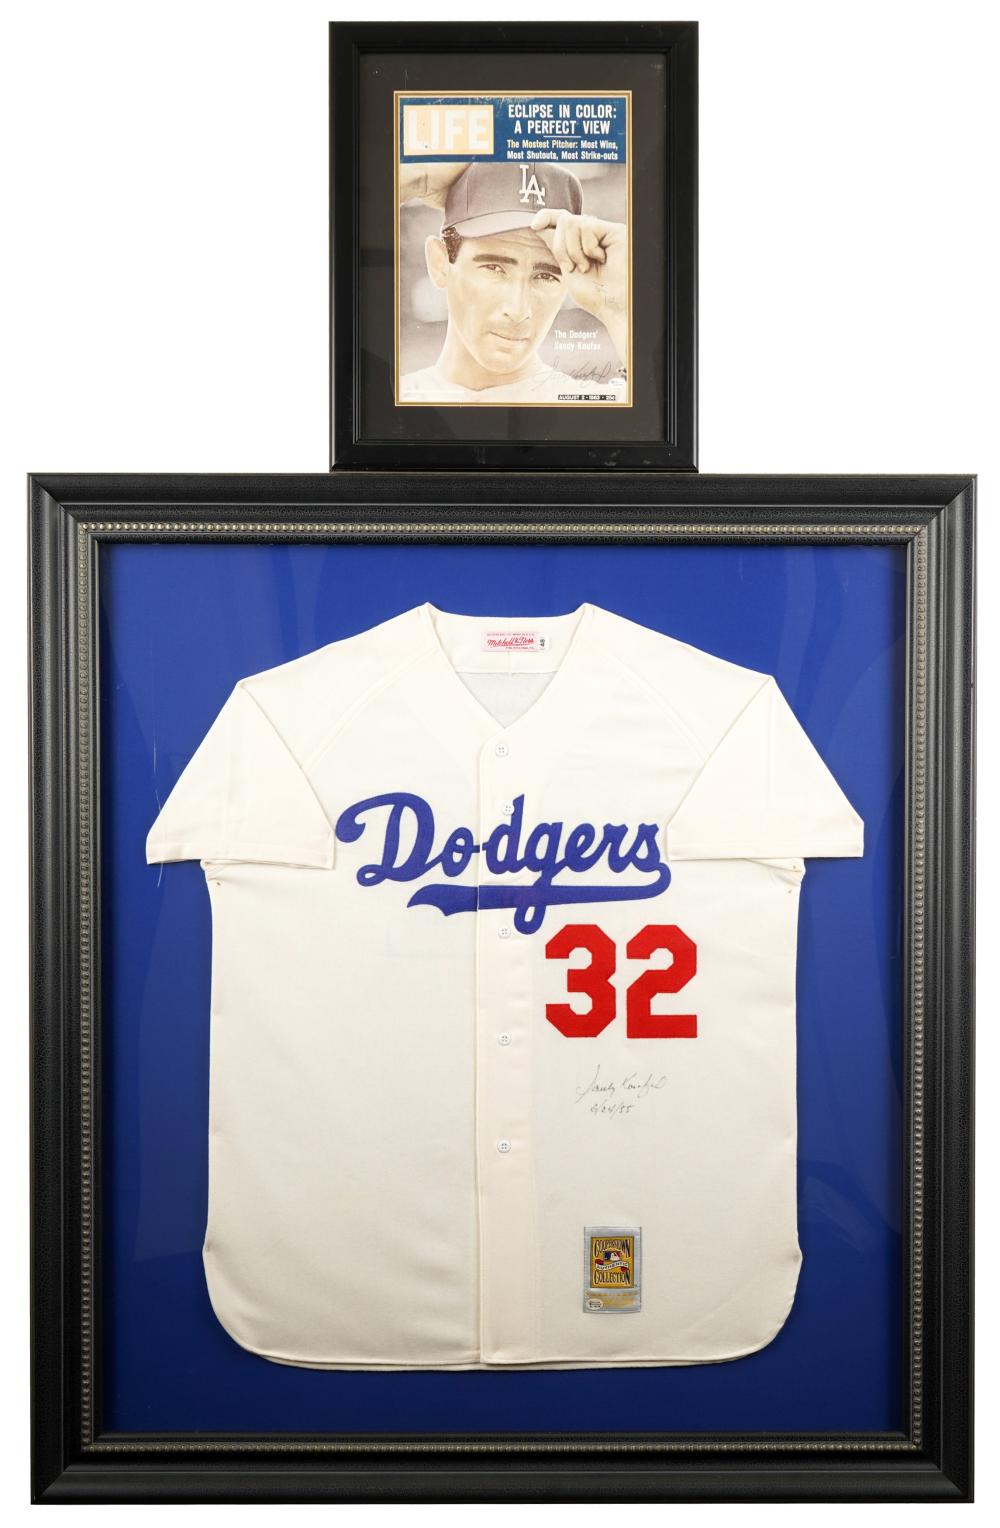 SANDY KOUFAX SIGNED JERSEY AND 301040